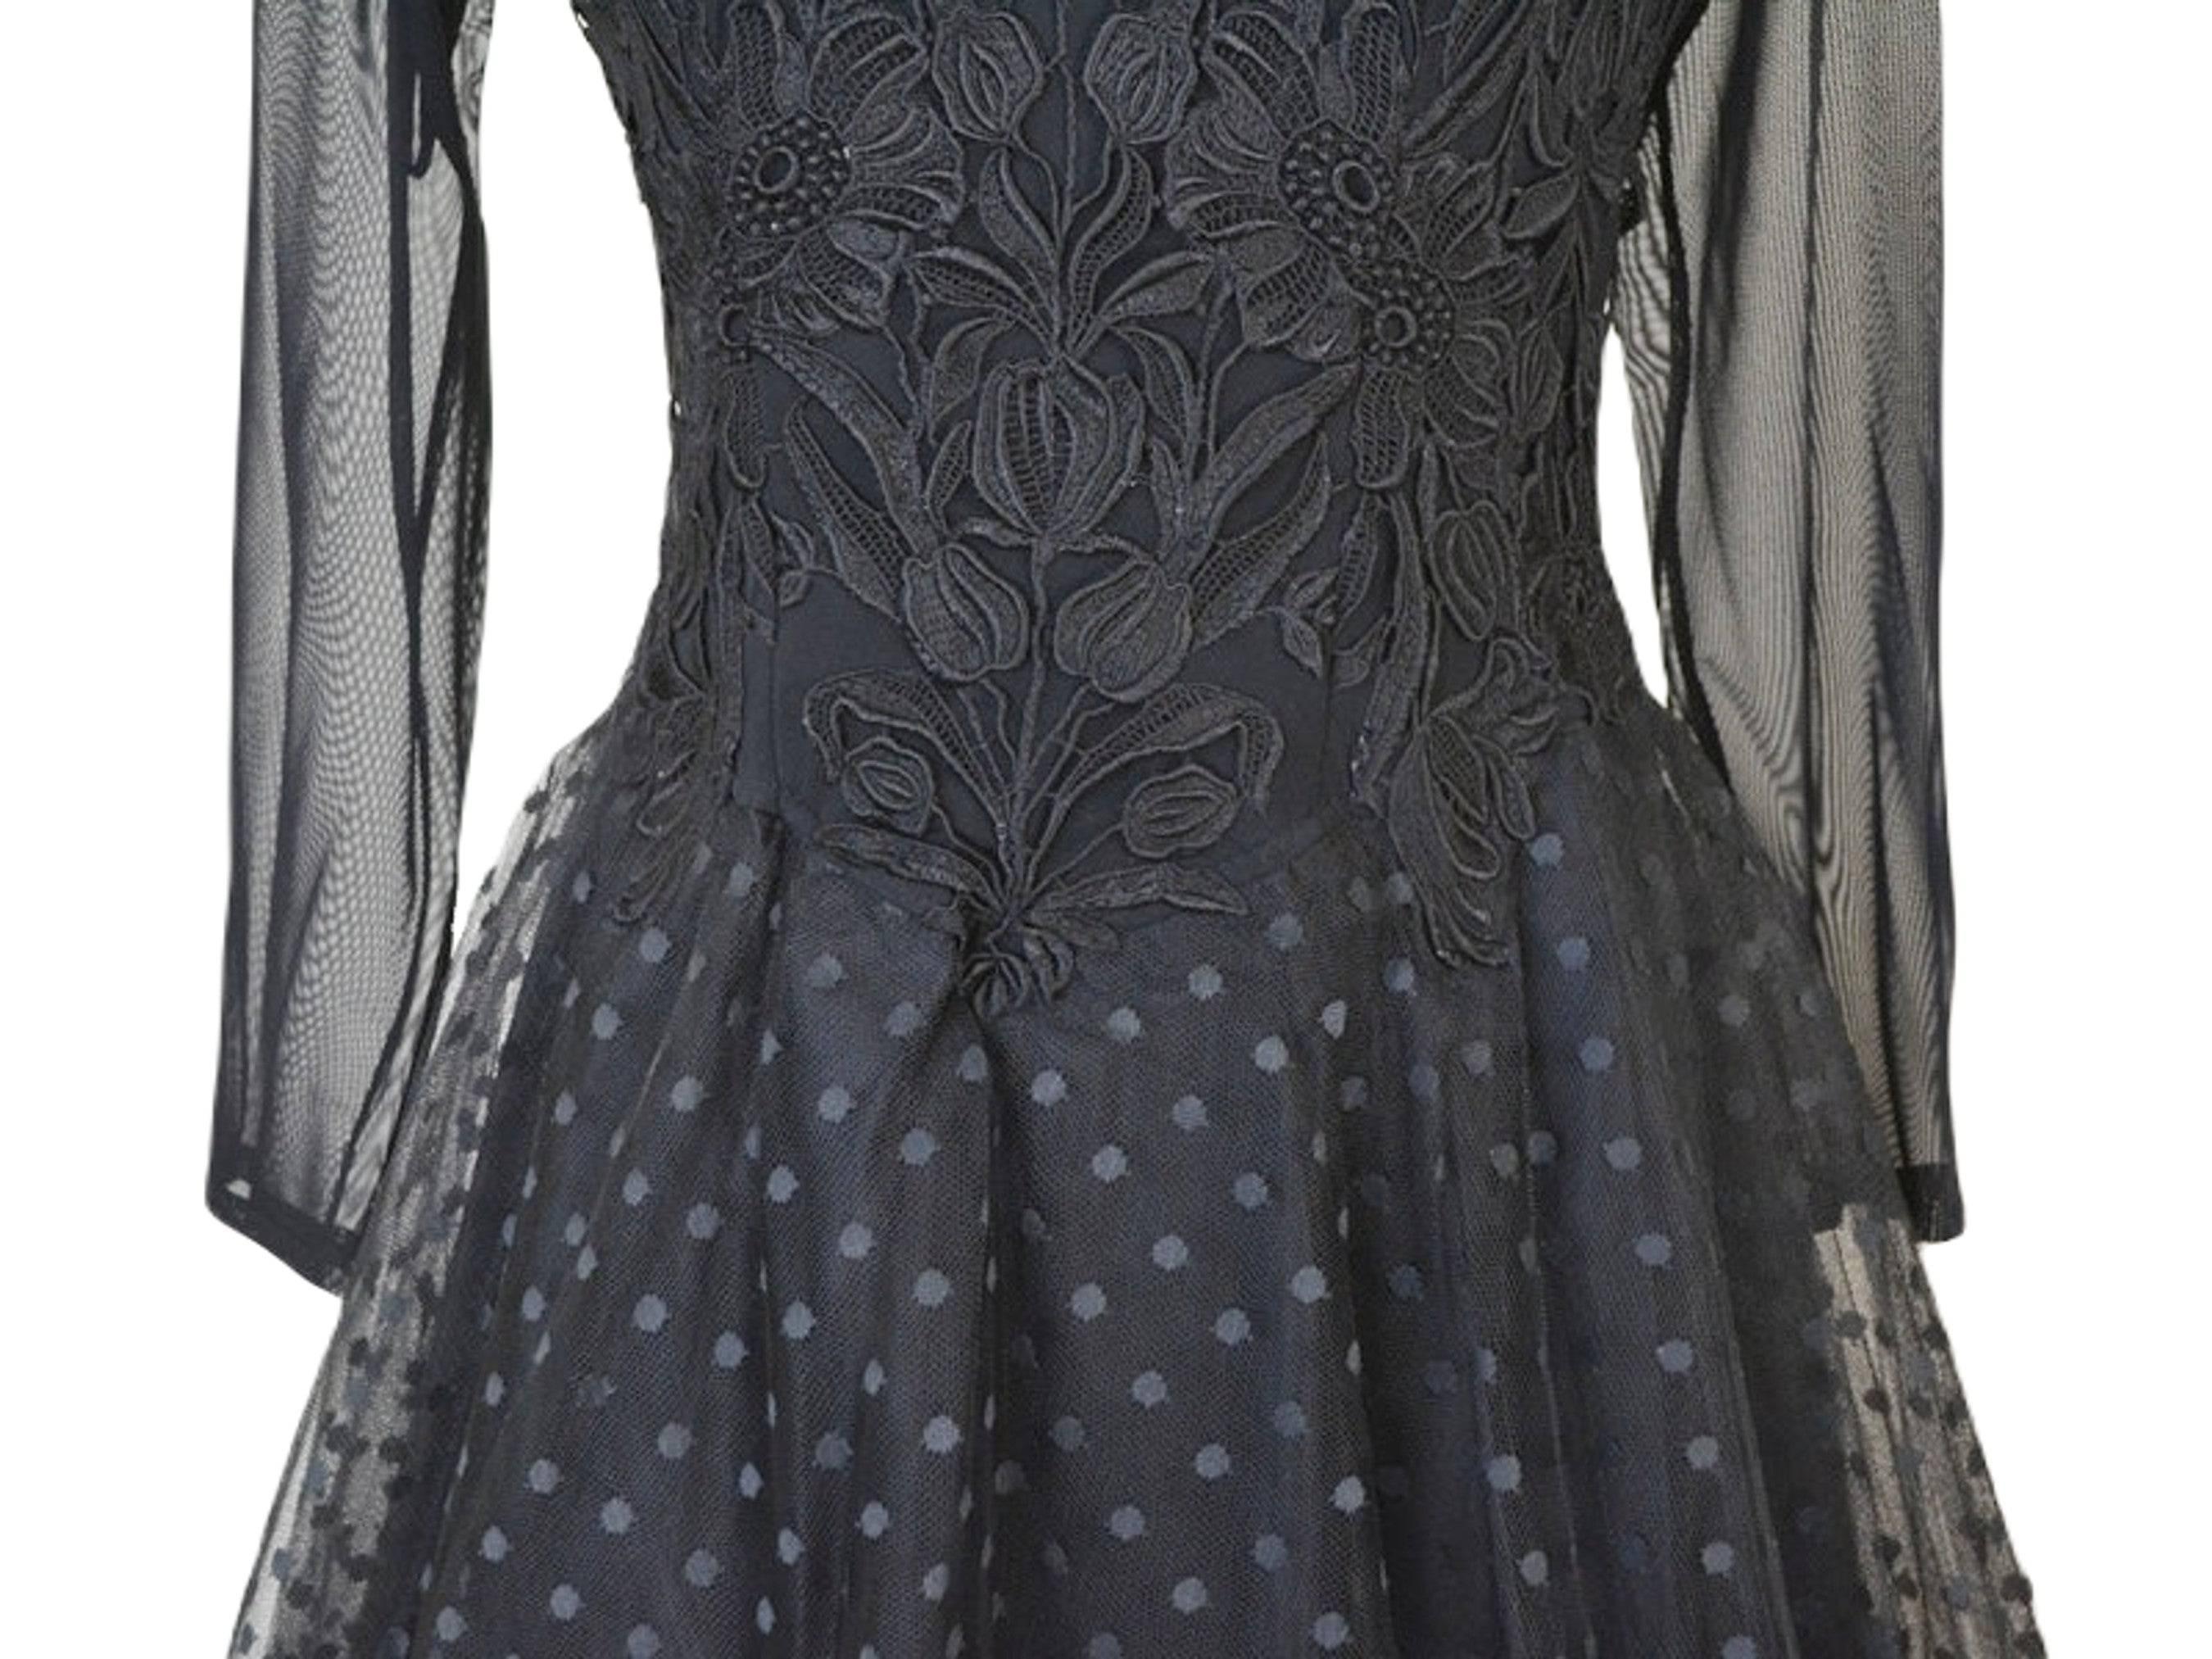 Lillie Rubin Sheer Black Polka Dot and Lace Soft Tulle Gothic Evening Gown SM For Sale 1